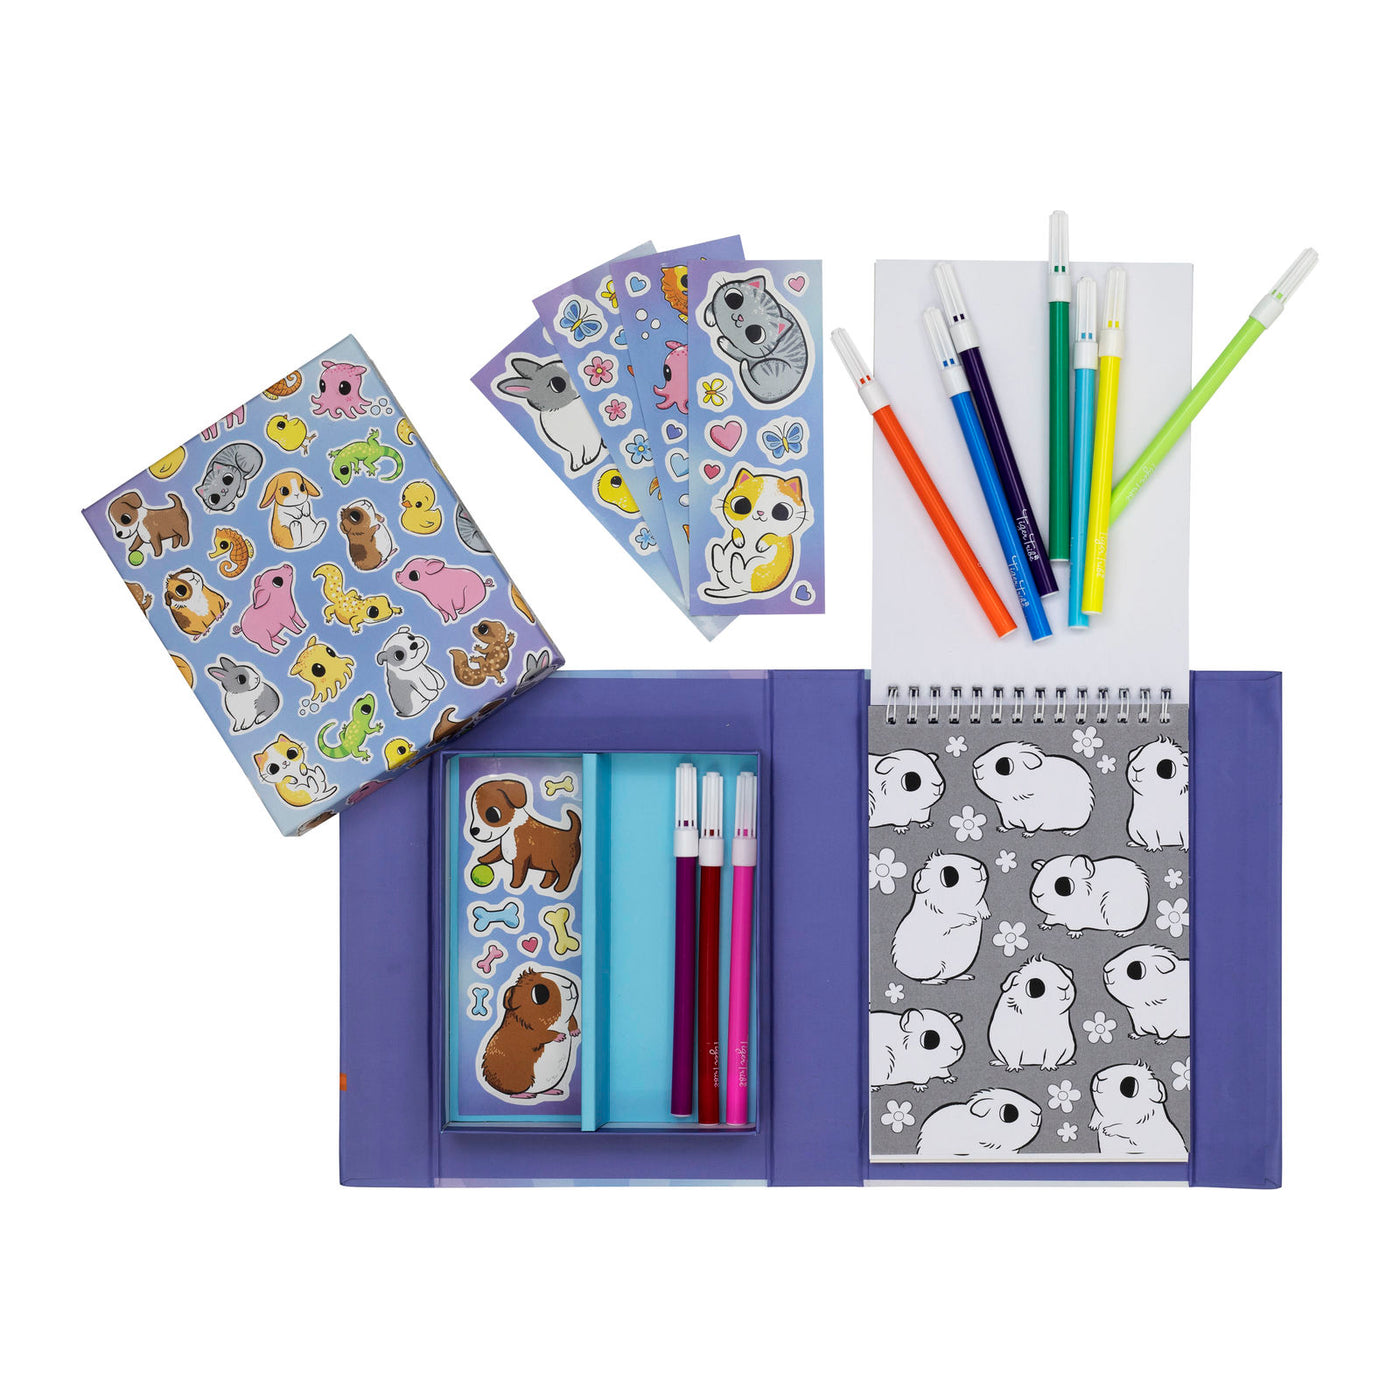 Tiger Tribe Colouring Set - Baby Animals Contents